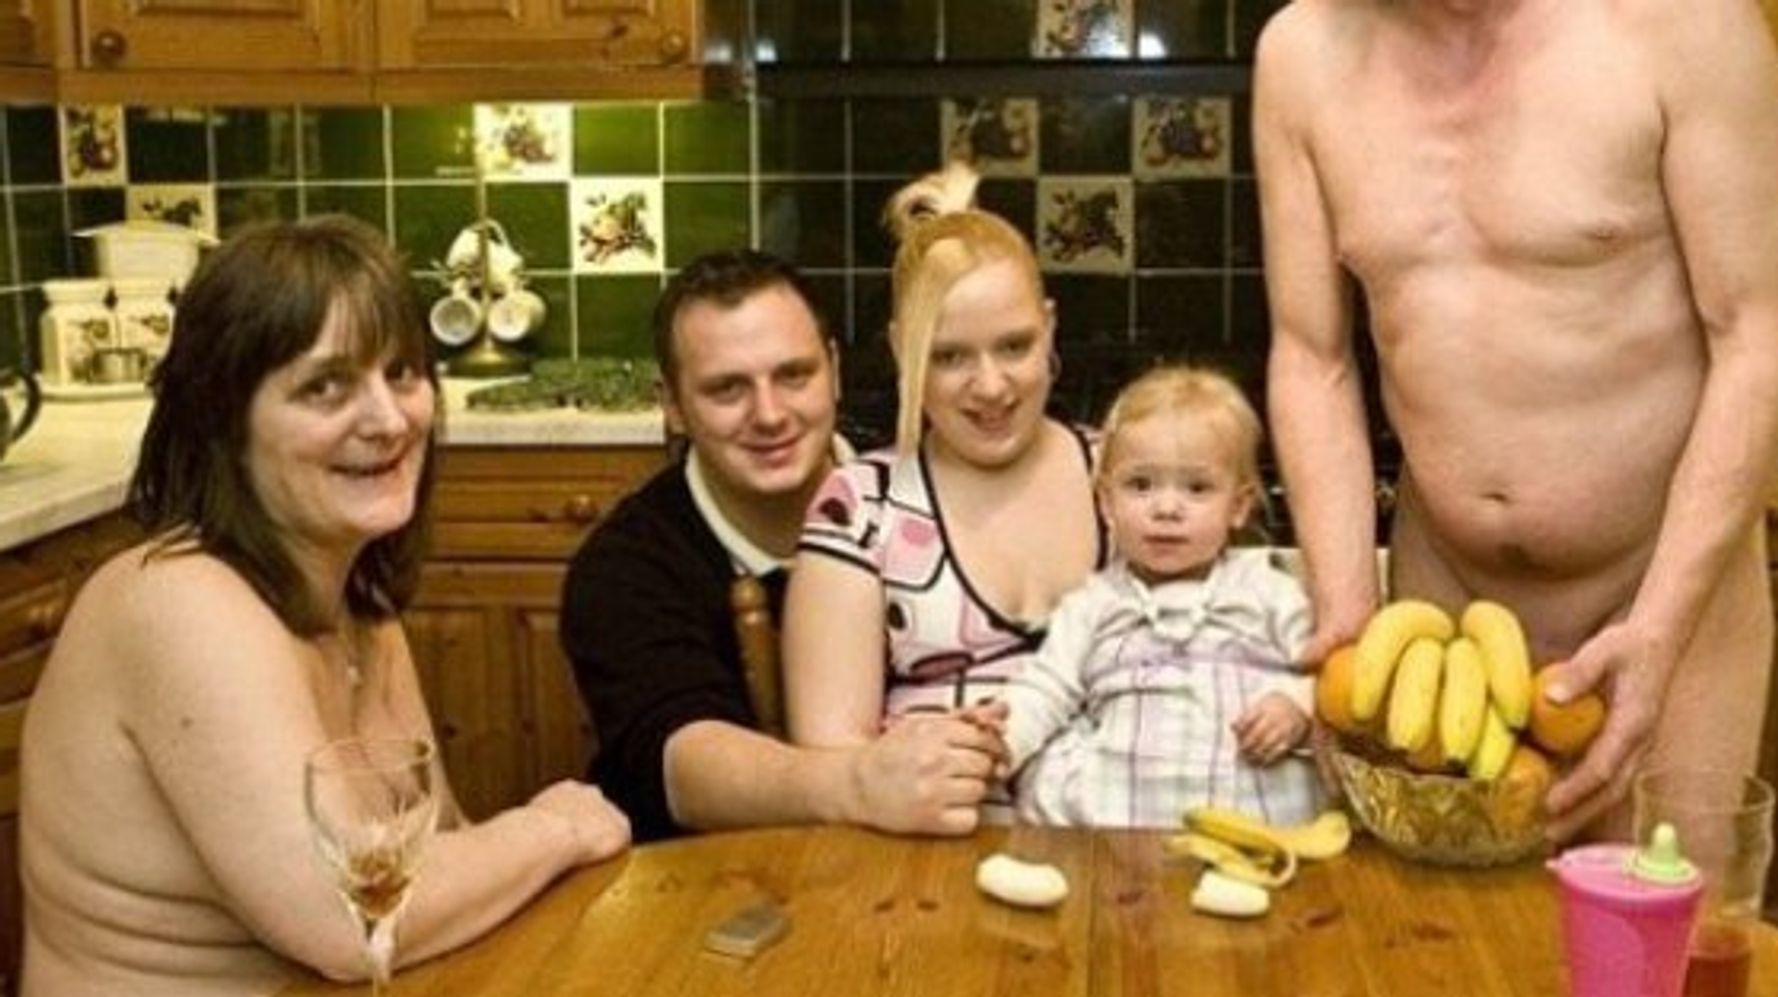 Naked Experiences With Family And Friends